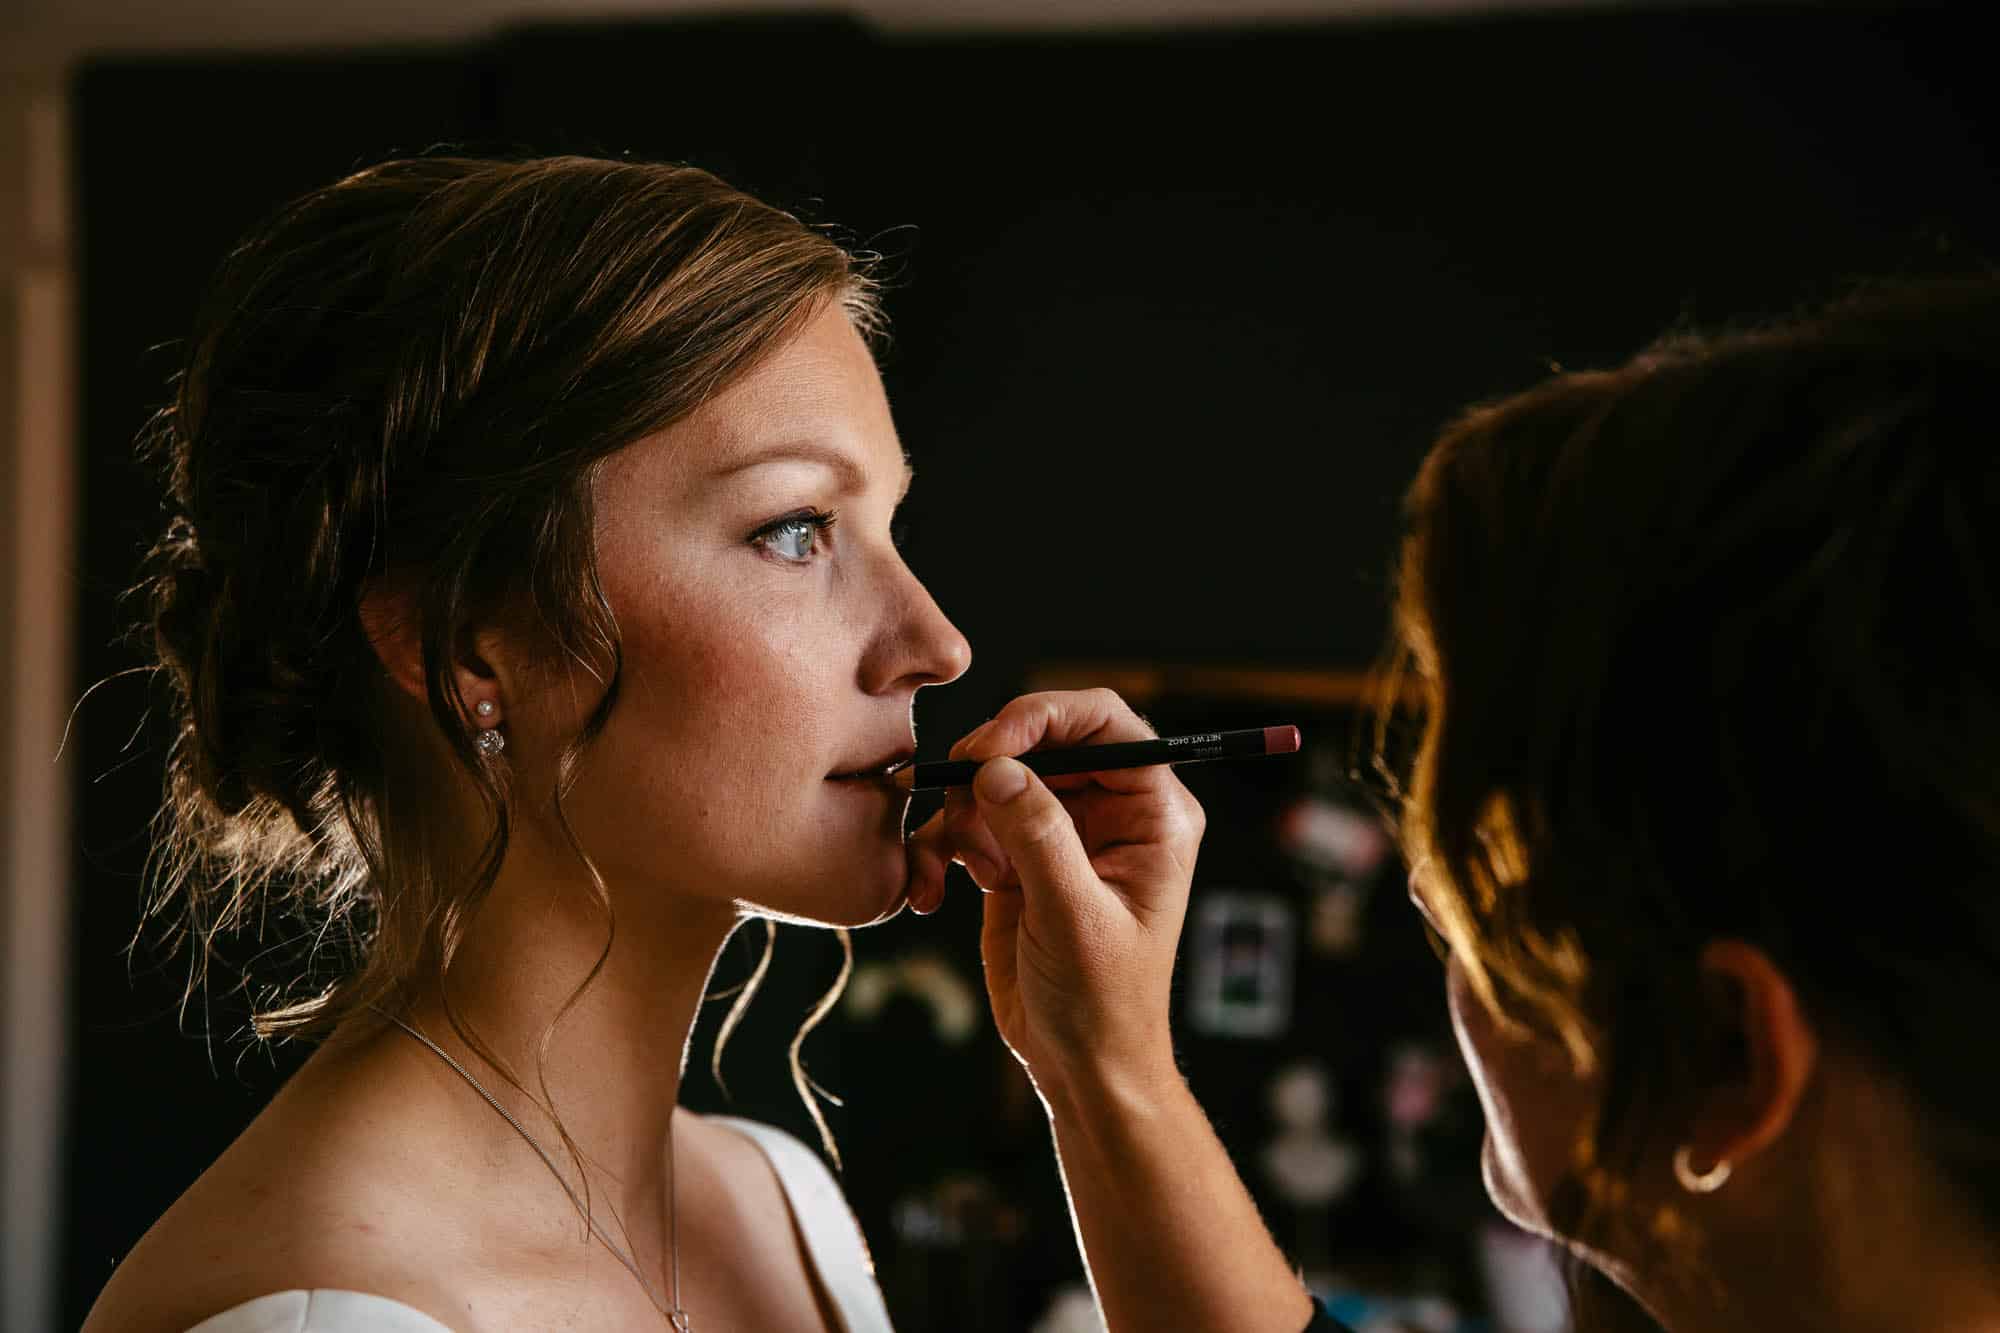 A bride having her bridal make-up done by a make-up artist.